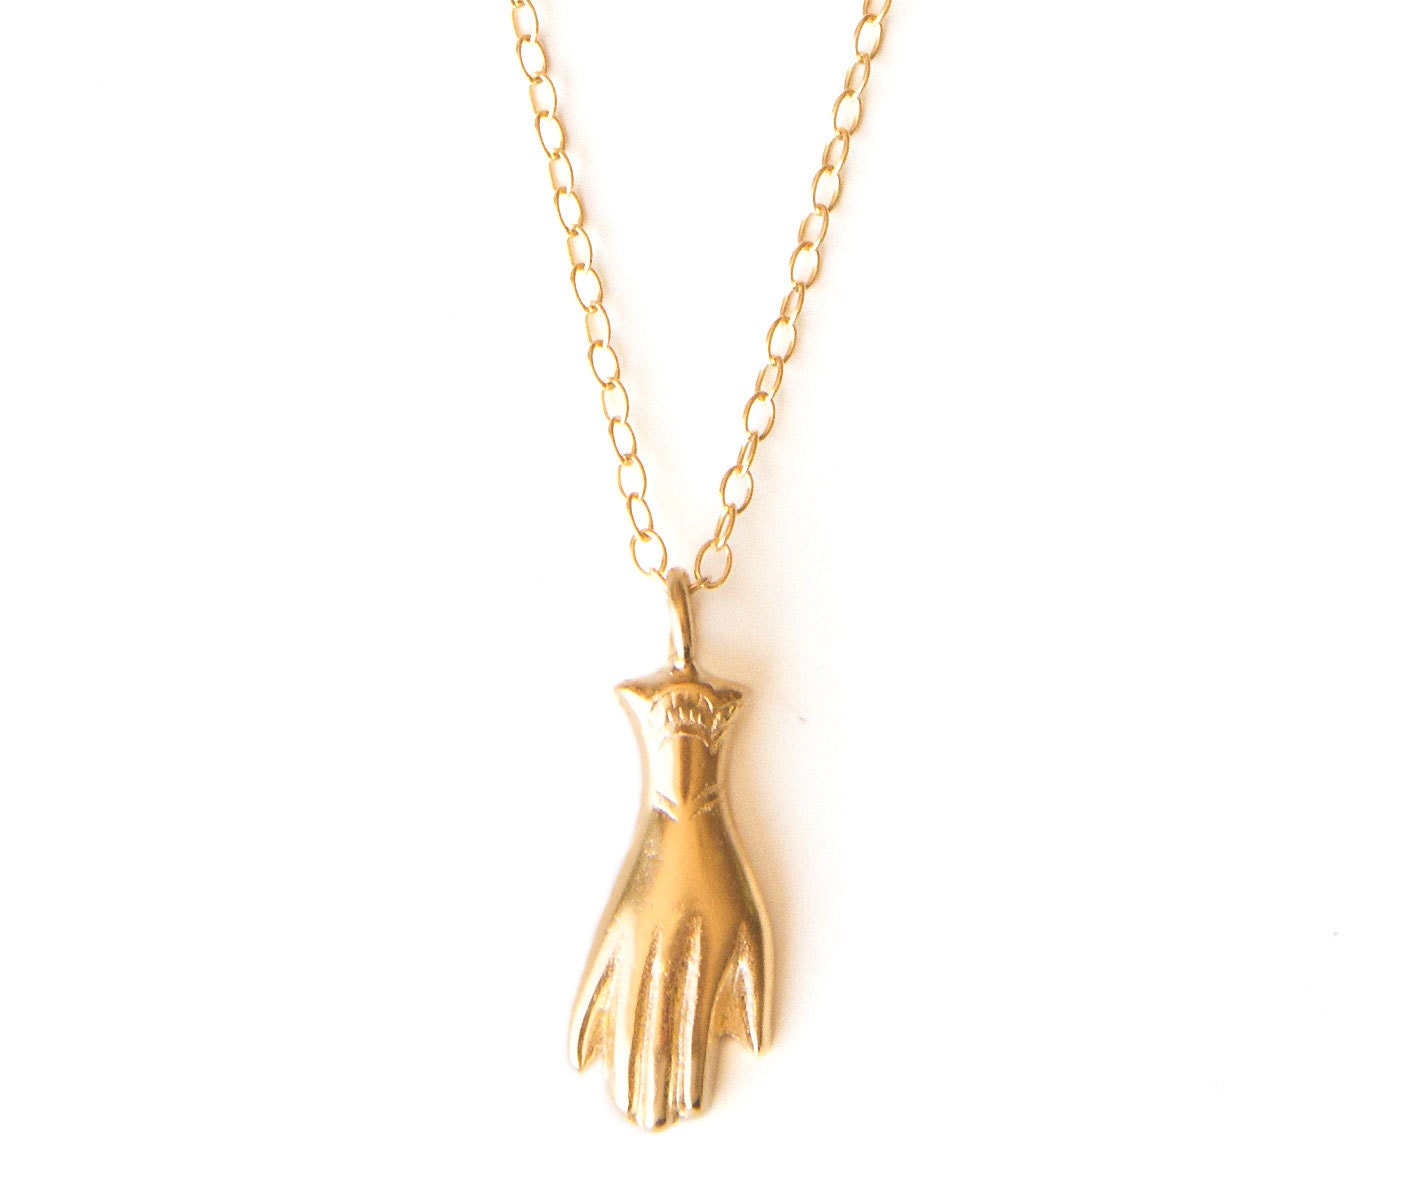 Hamsa Necklace in Gold Fill or Sterling Silver, Hand of God Layering Pendant necklace